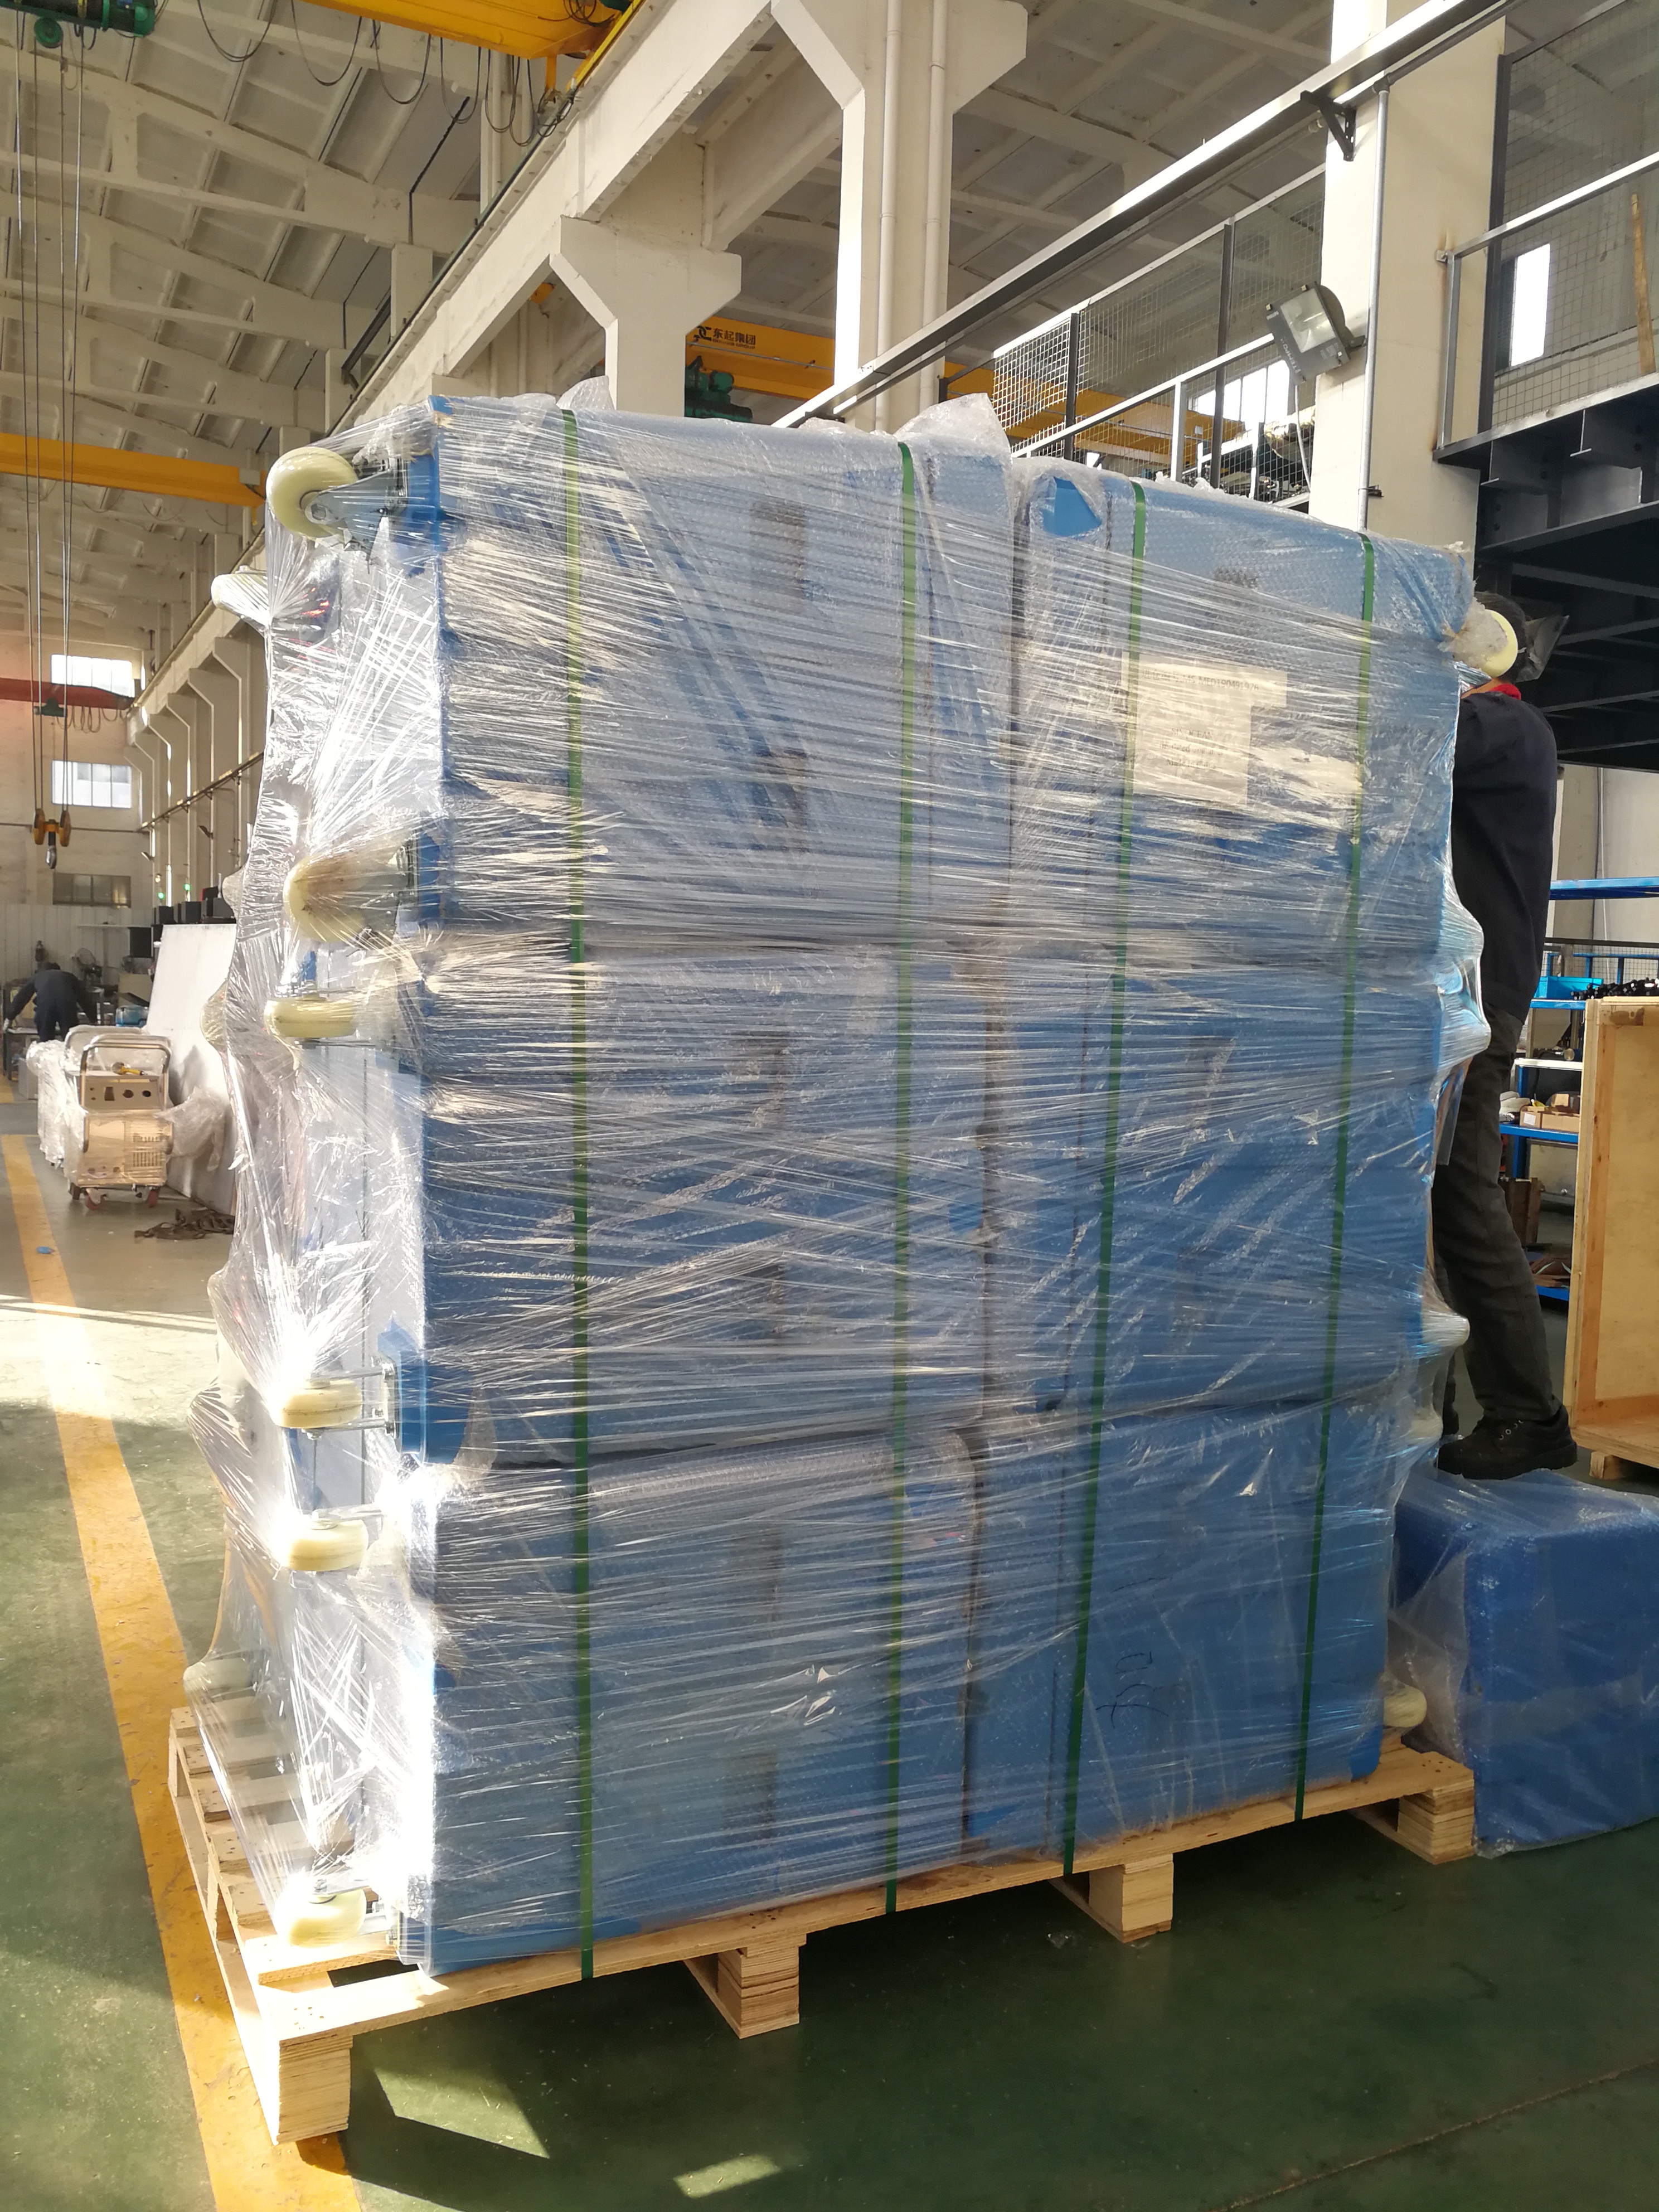 Dry ice boxes shipped to Israel